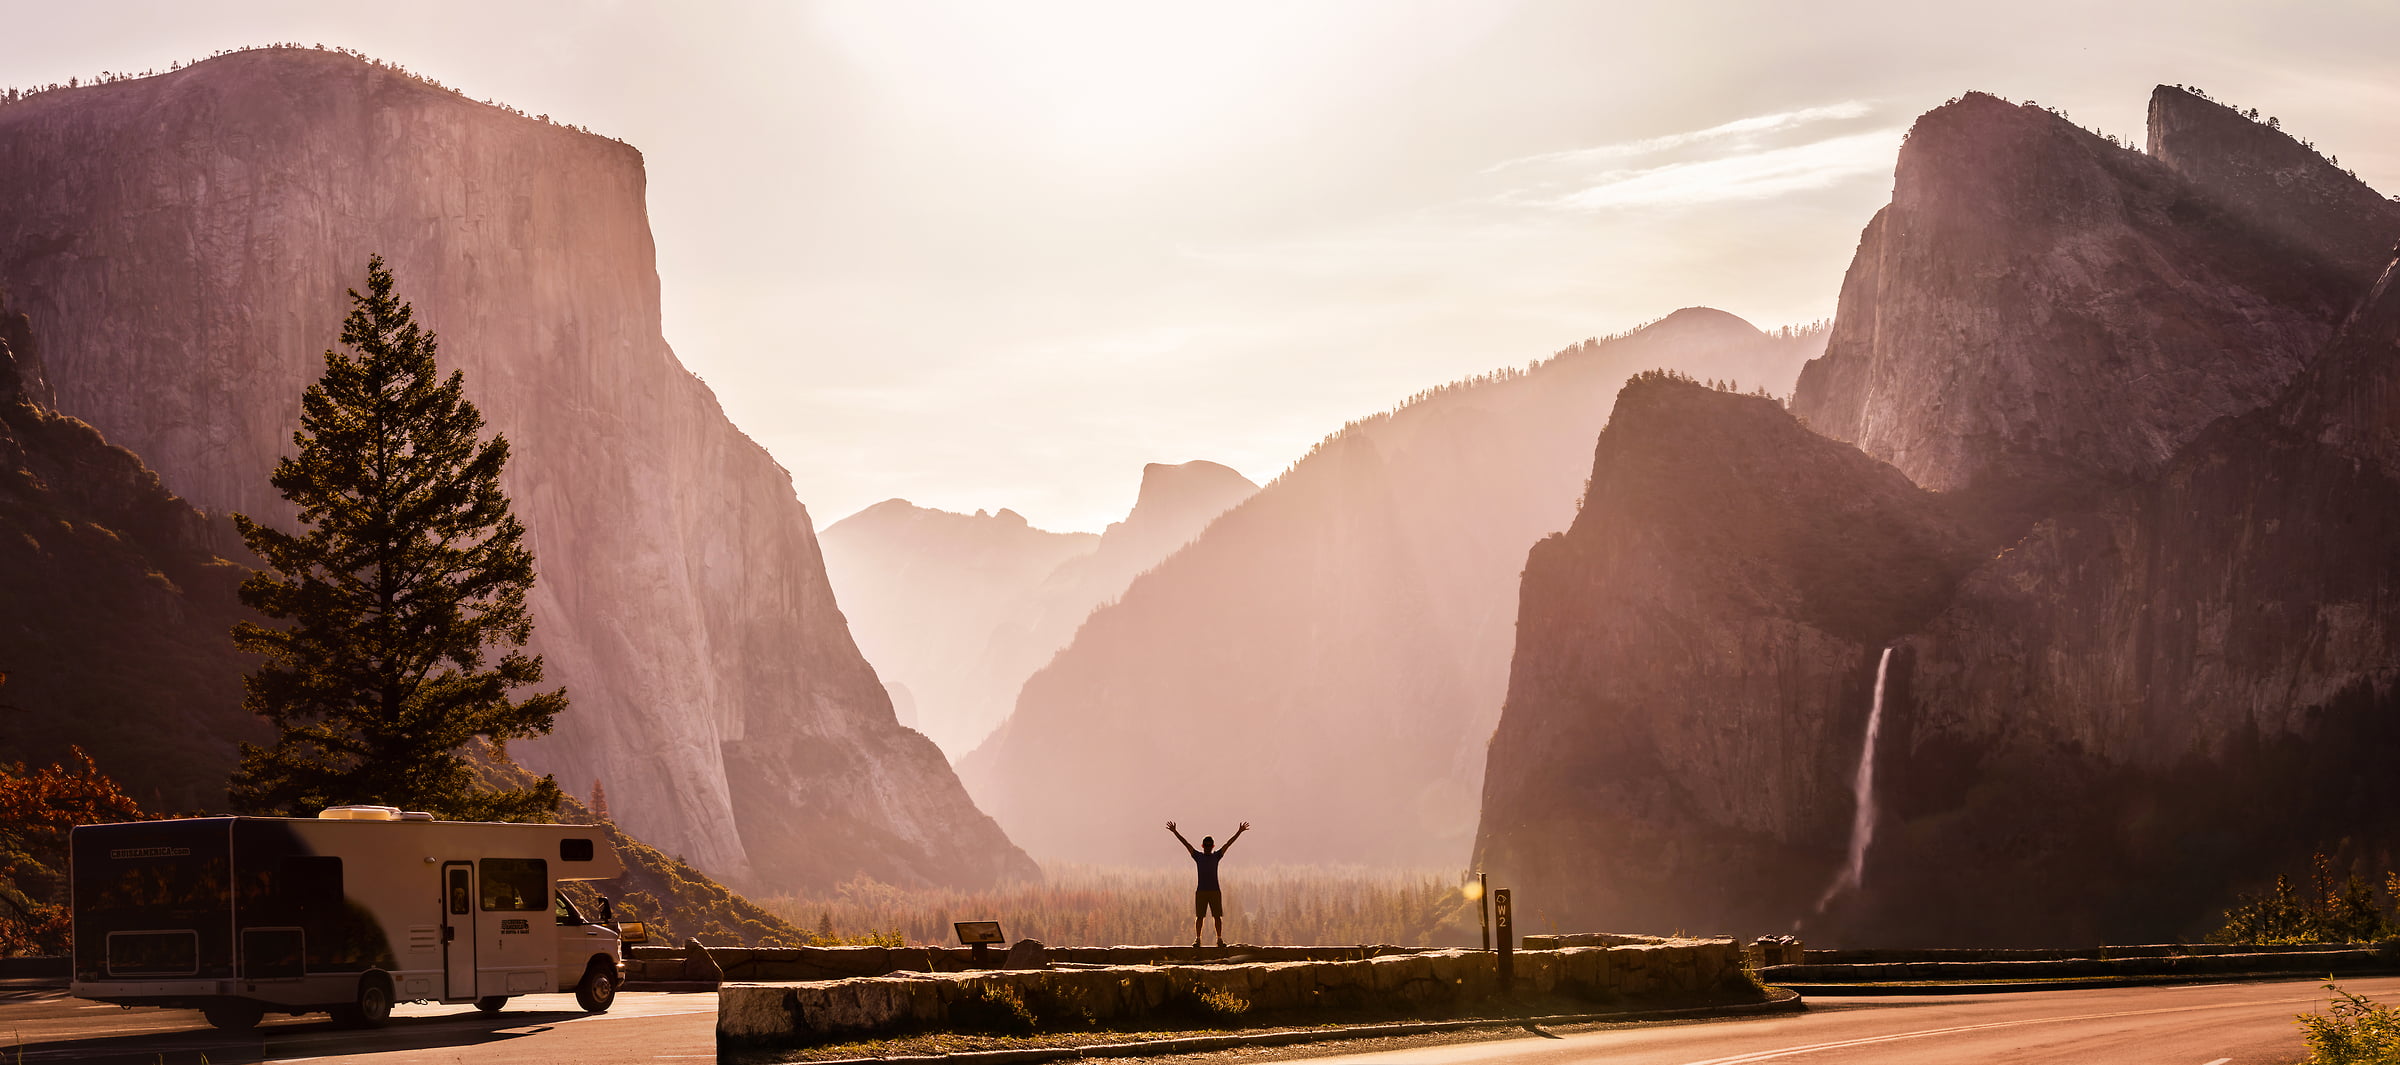 138 megapixels! A very high definition inspirational VAST photo of a joyful man in nature among mountains and waterfalls; created by Dan Piech in the valley of Yosemite National Park.